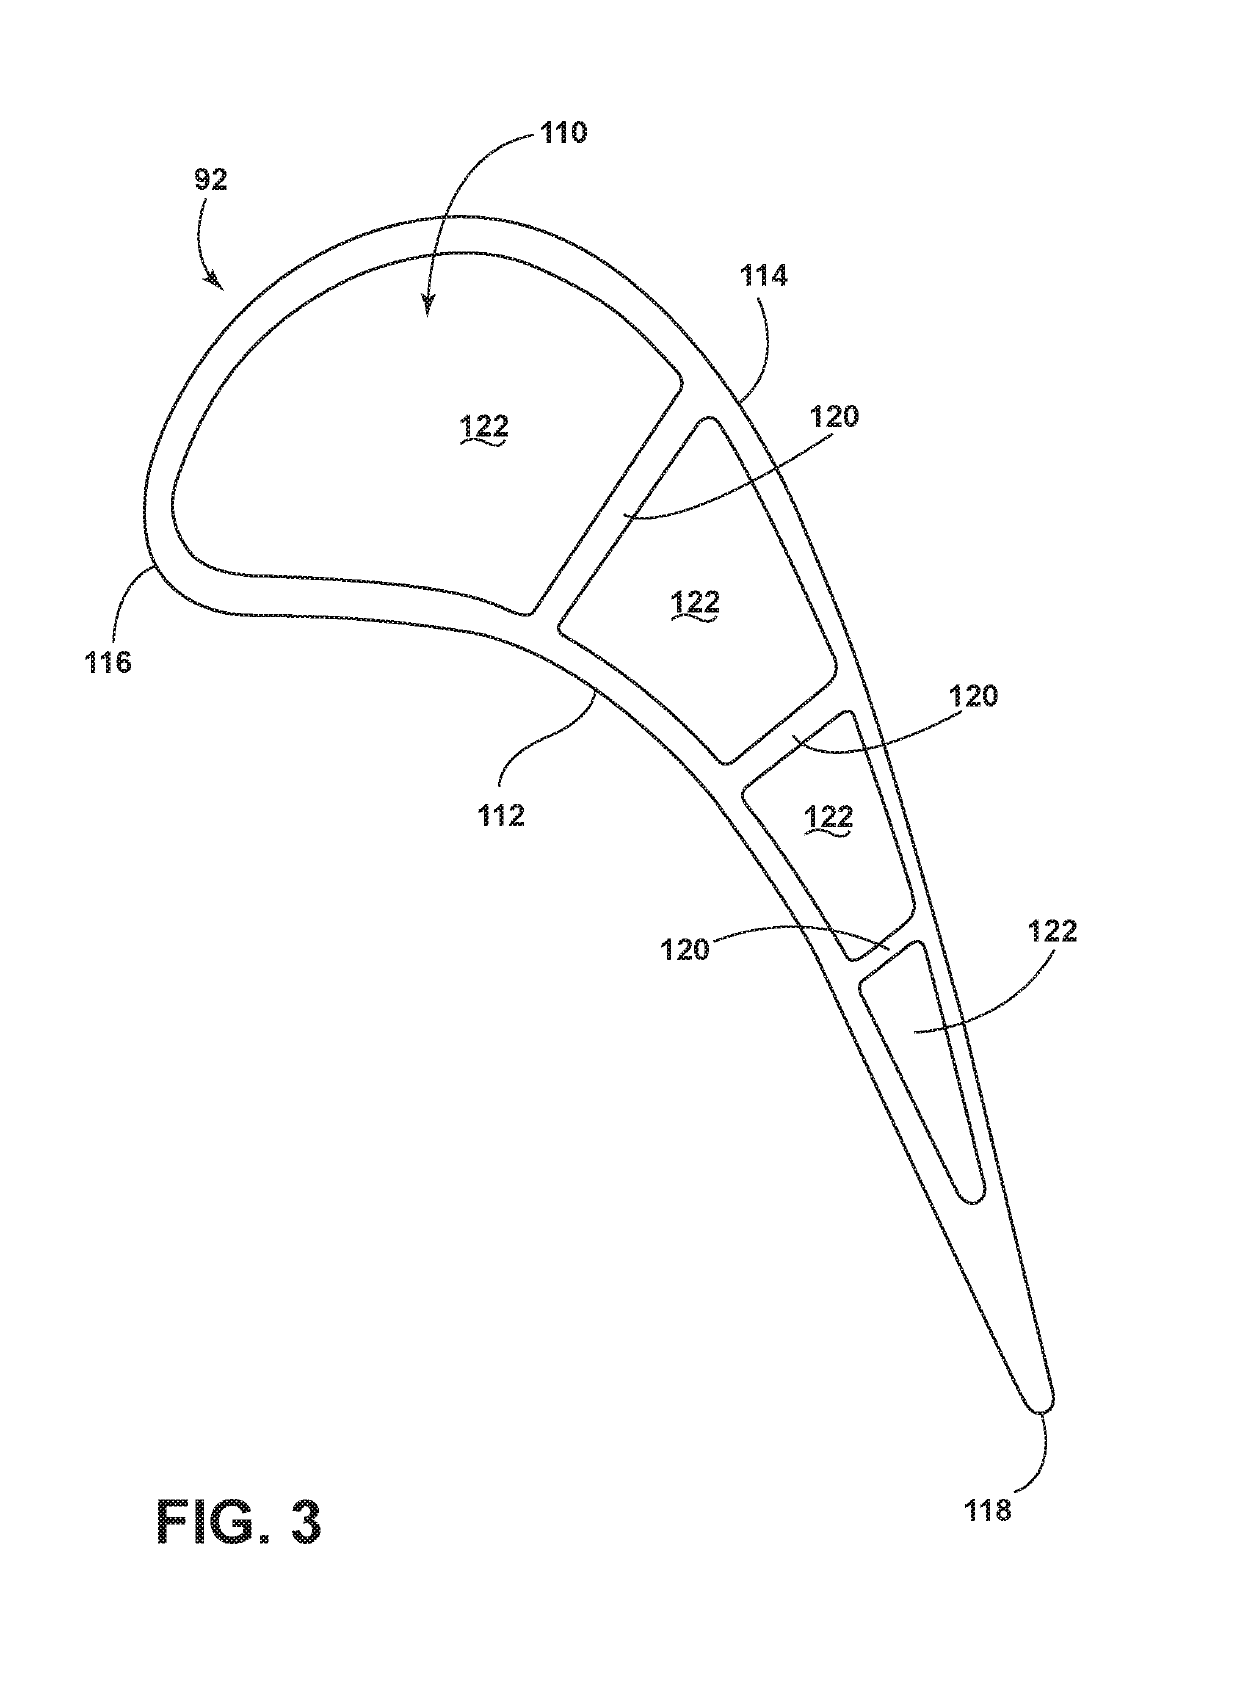 Airfoil for a gas turbine engine